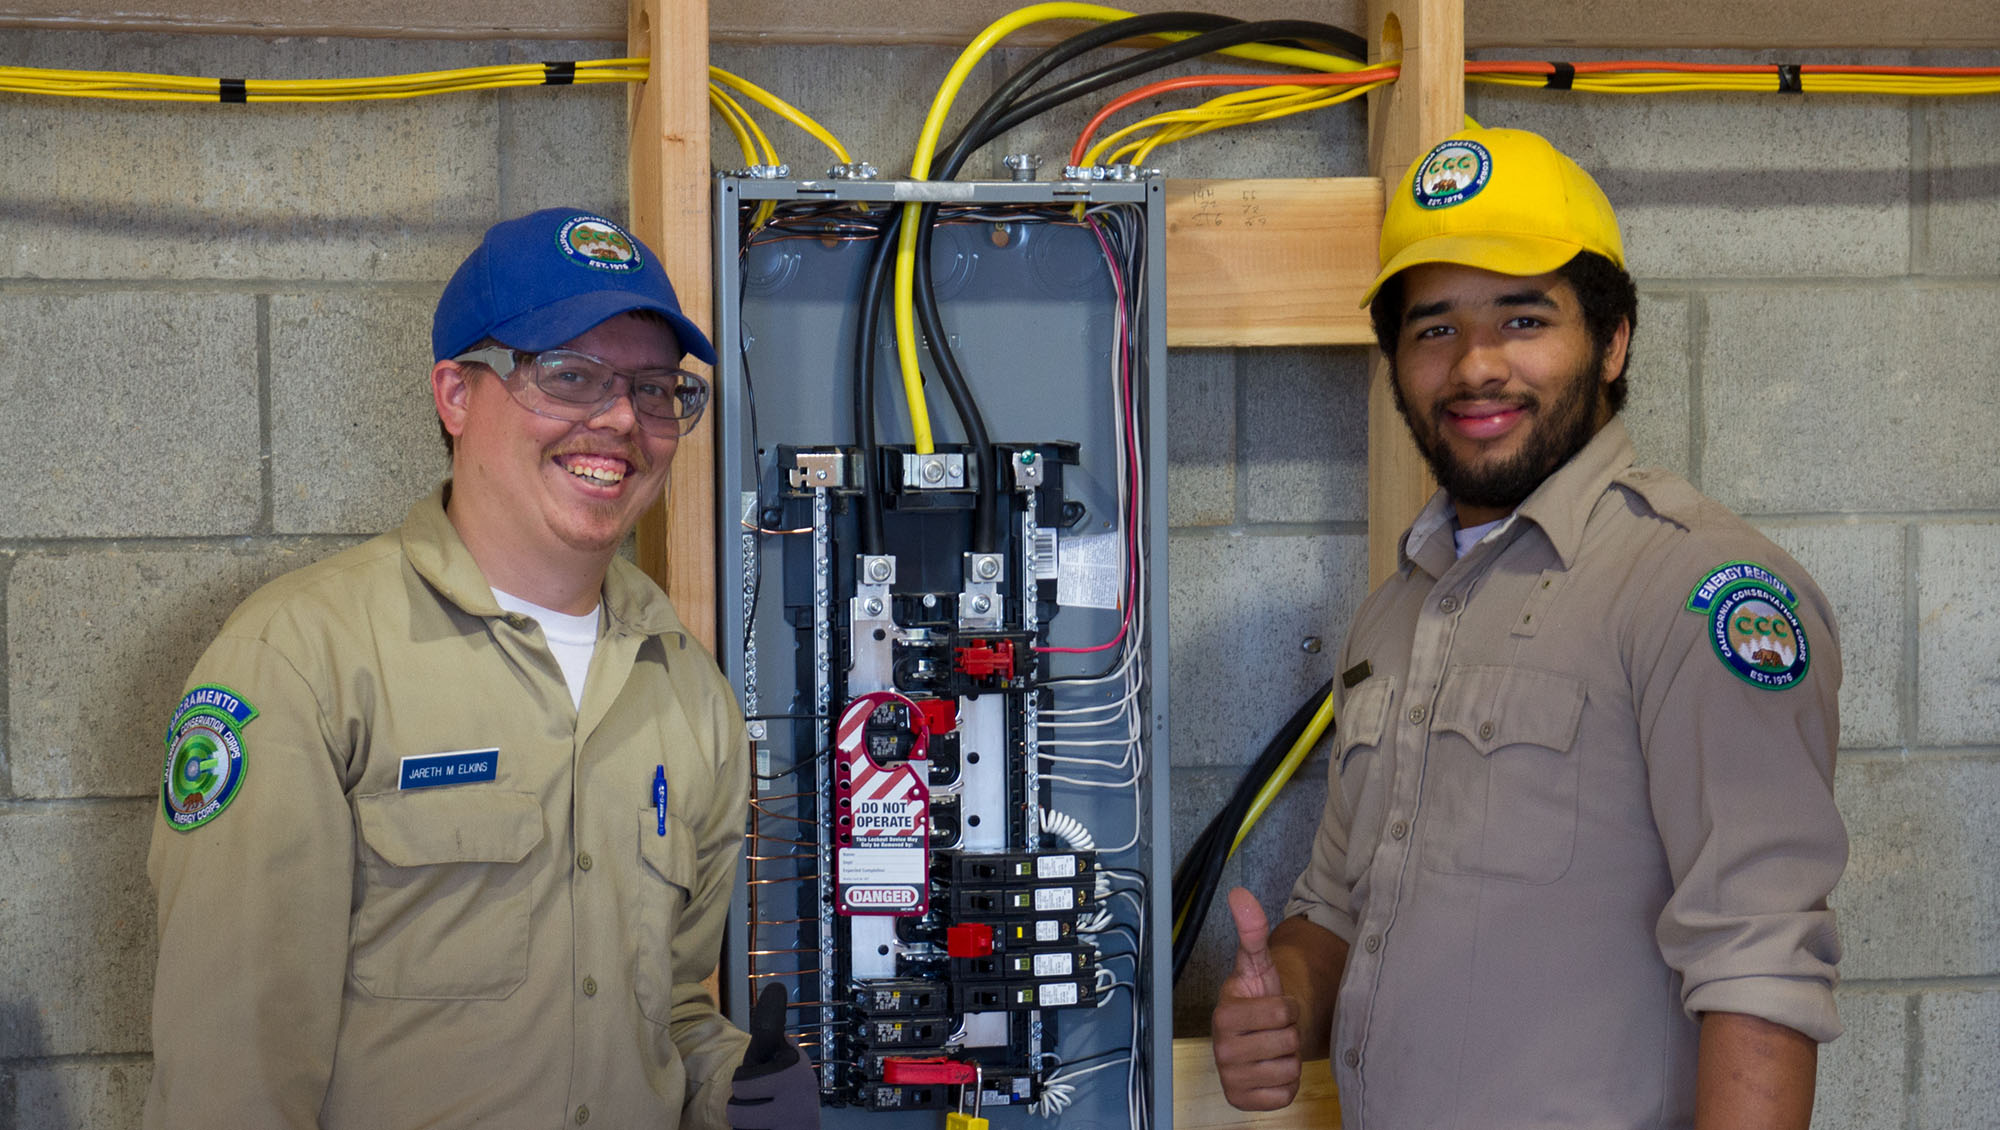 Two male energy technicians gaining knowledge through workplace training